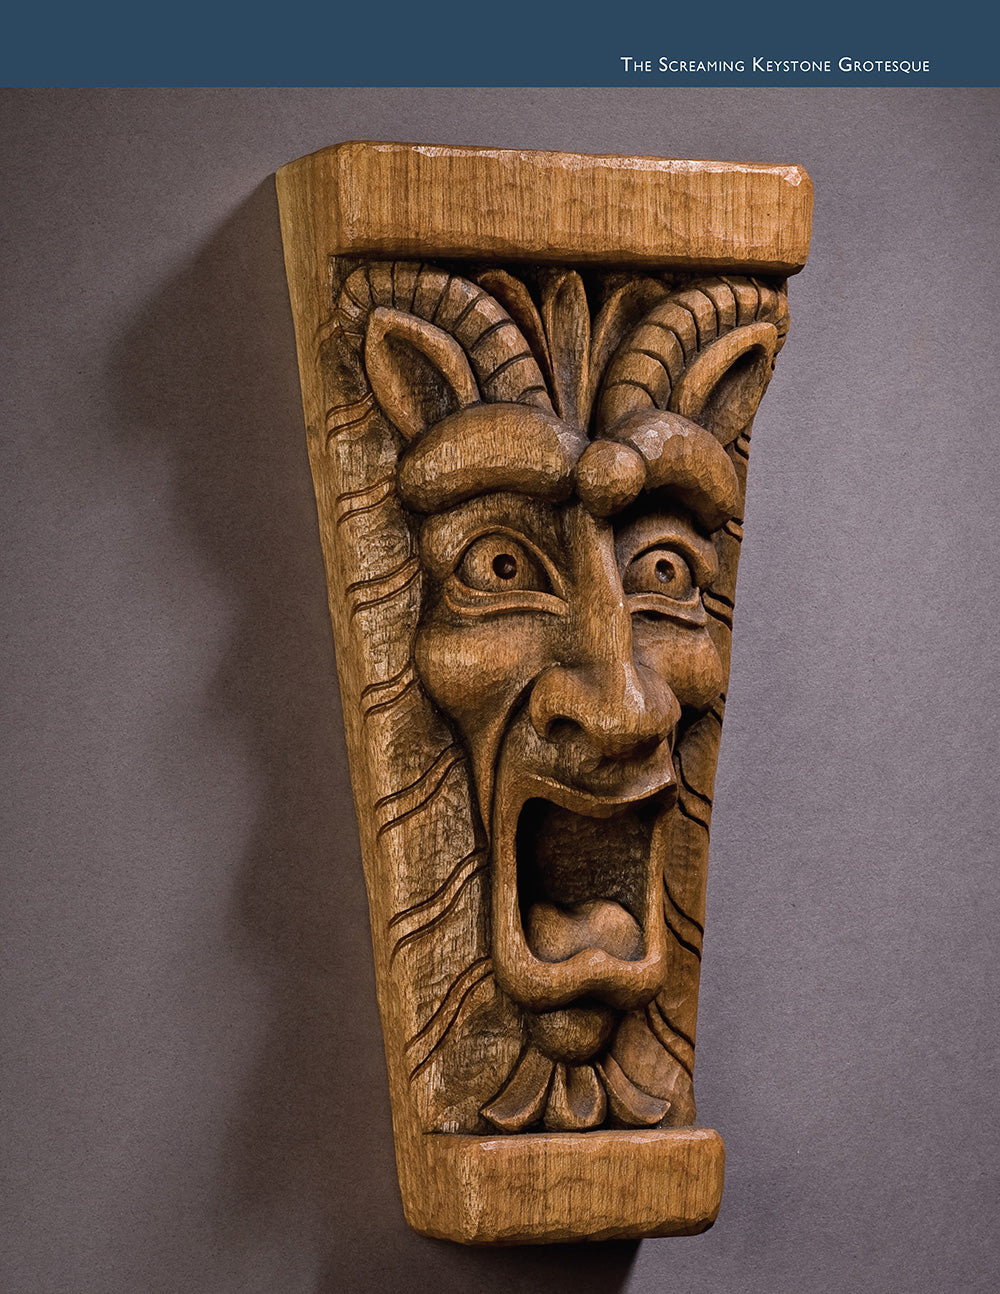 Carving Gargoyles, Grotesques, and Other Creatures of Myth